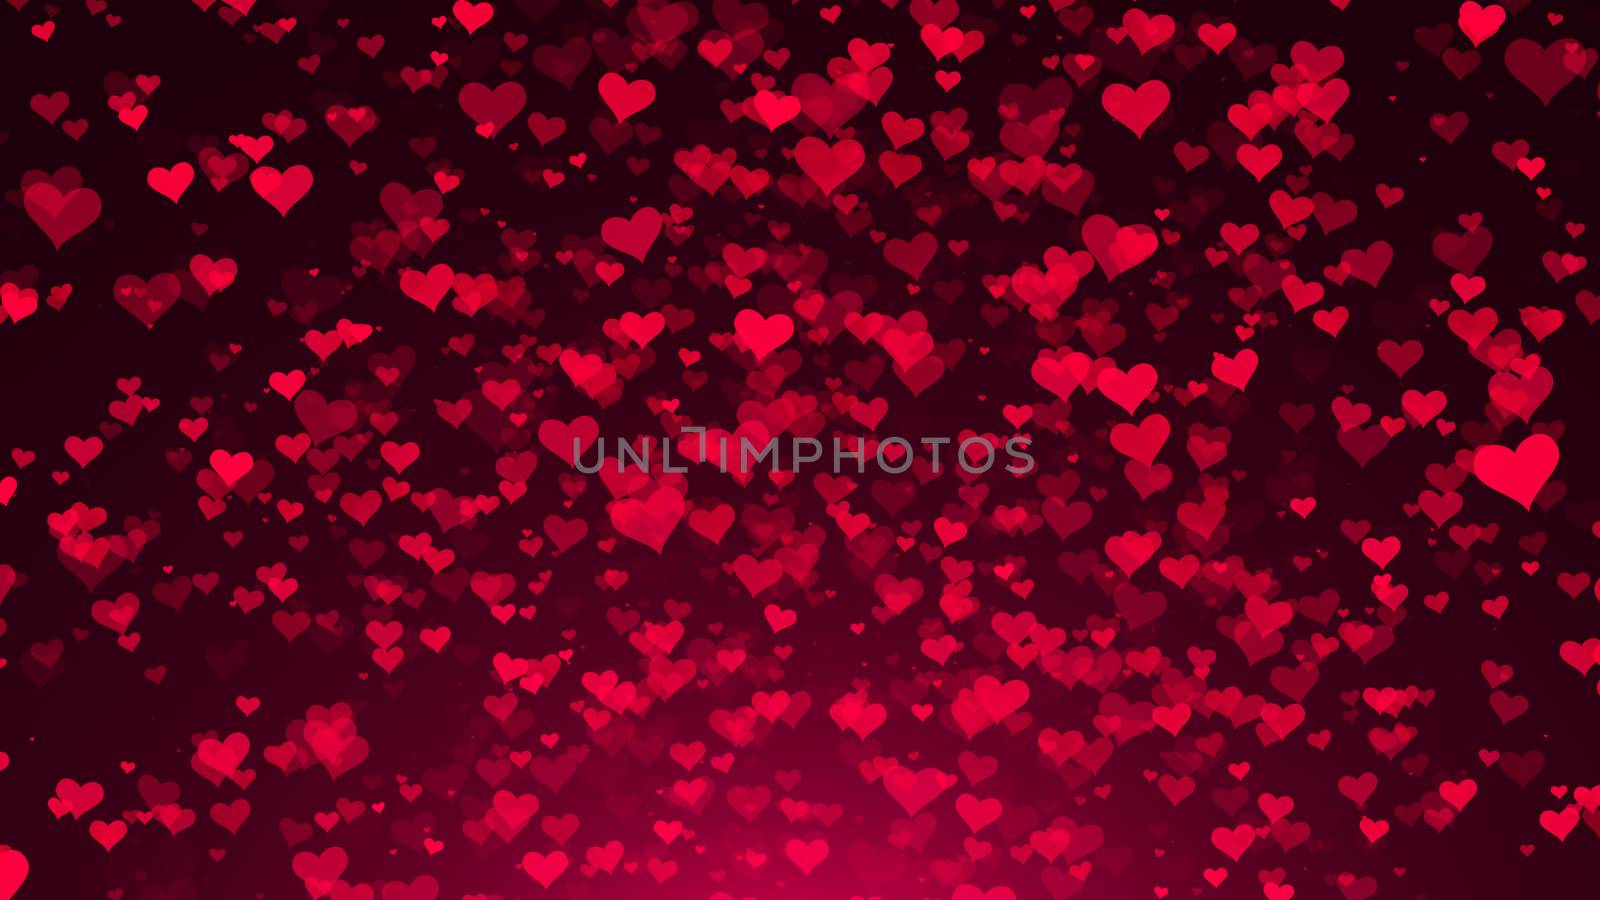 Abstract background with hearts. Digital illustration. 3d rendering